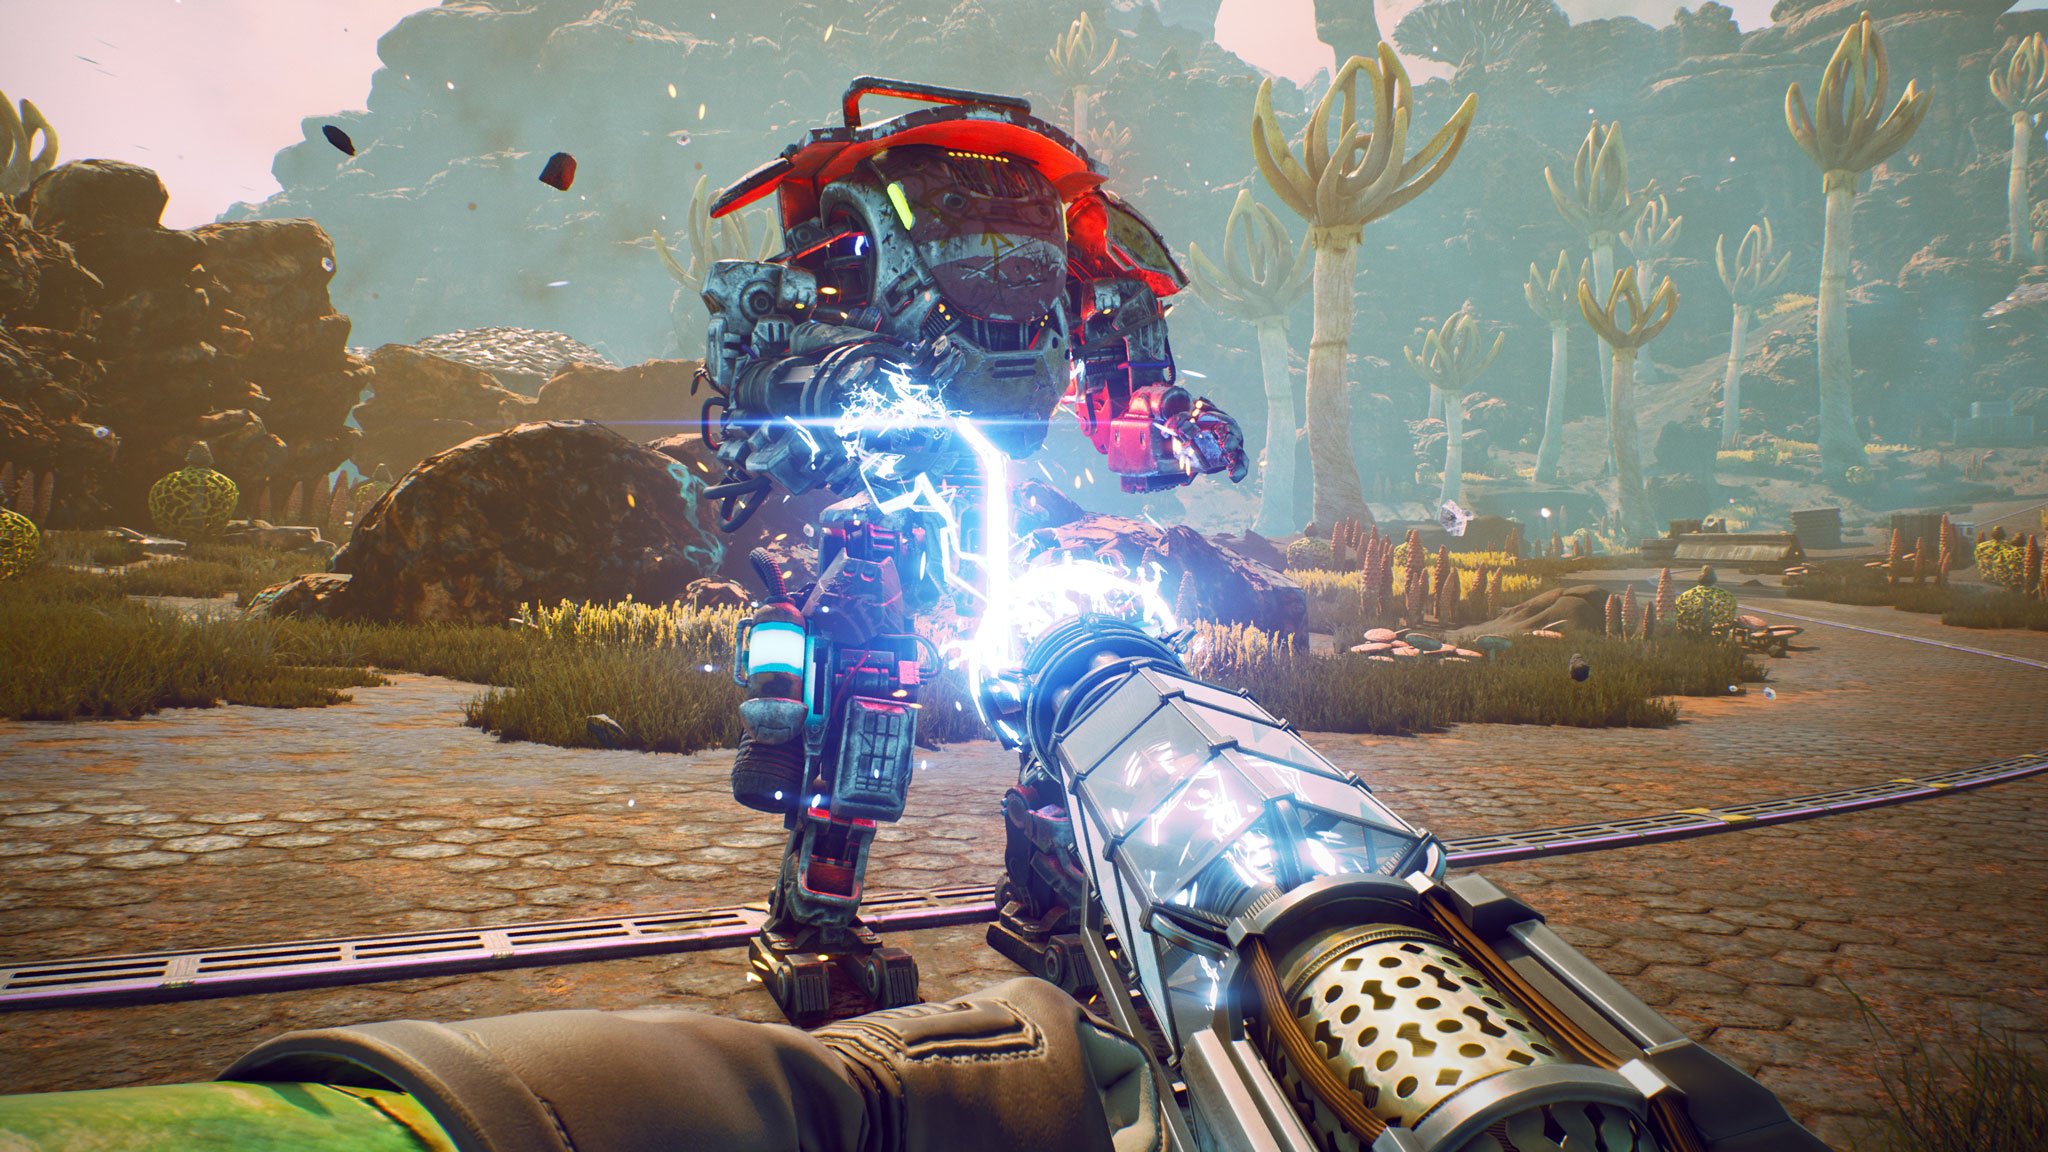 Gamesplanet Review Round Up - The Outer Worlds - News - Gamesplanet.com